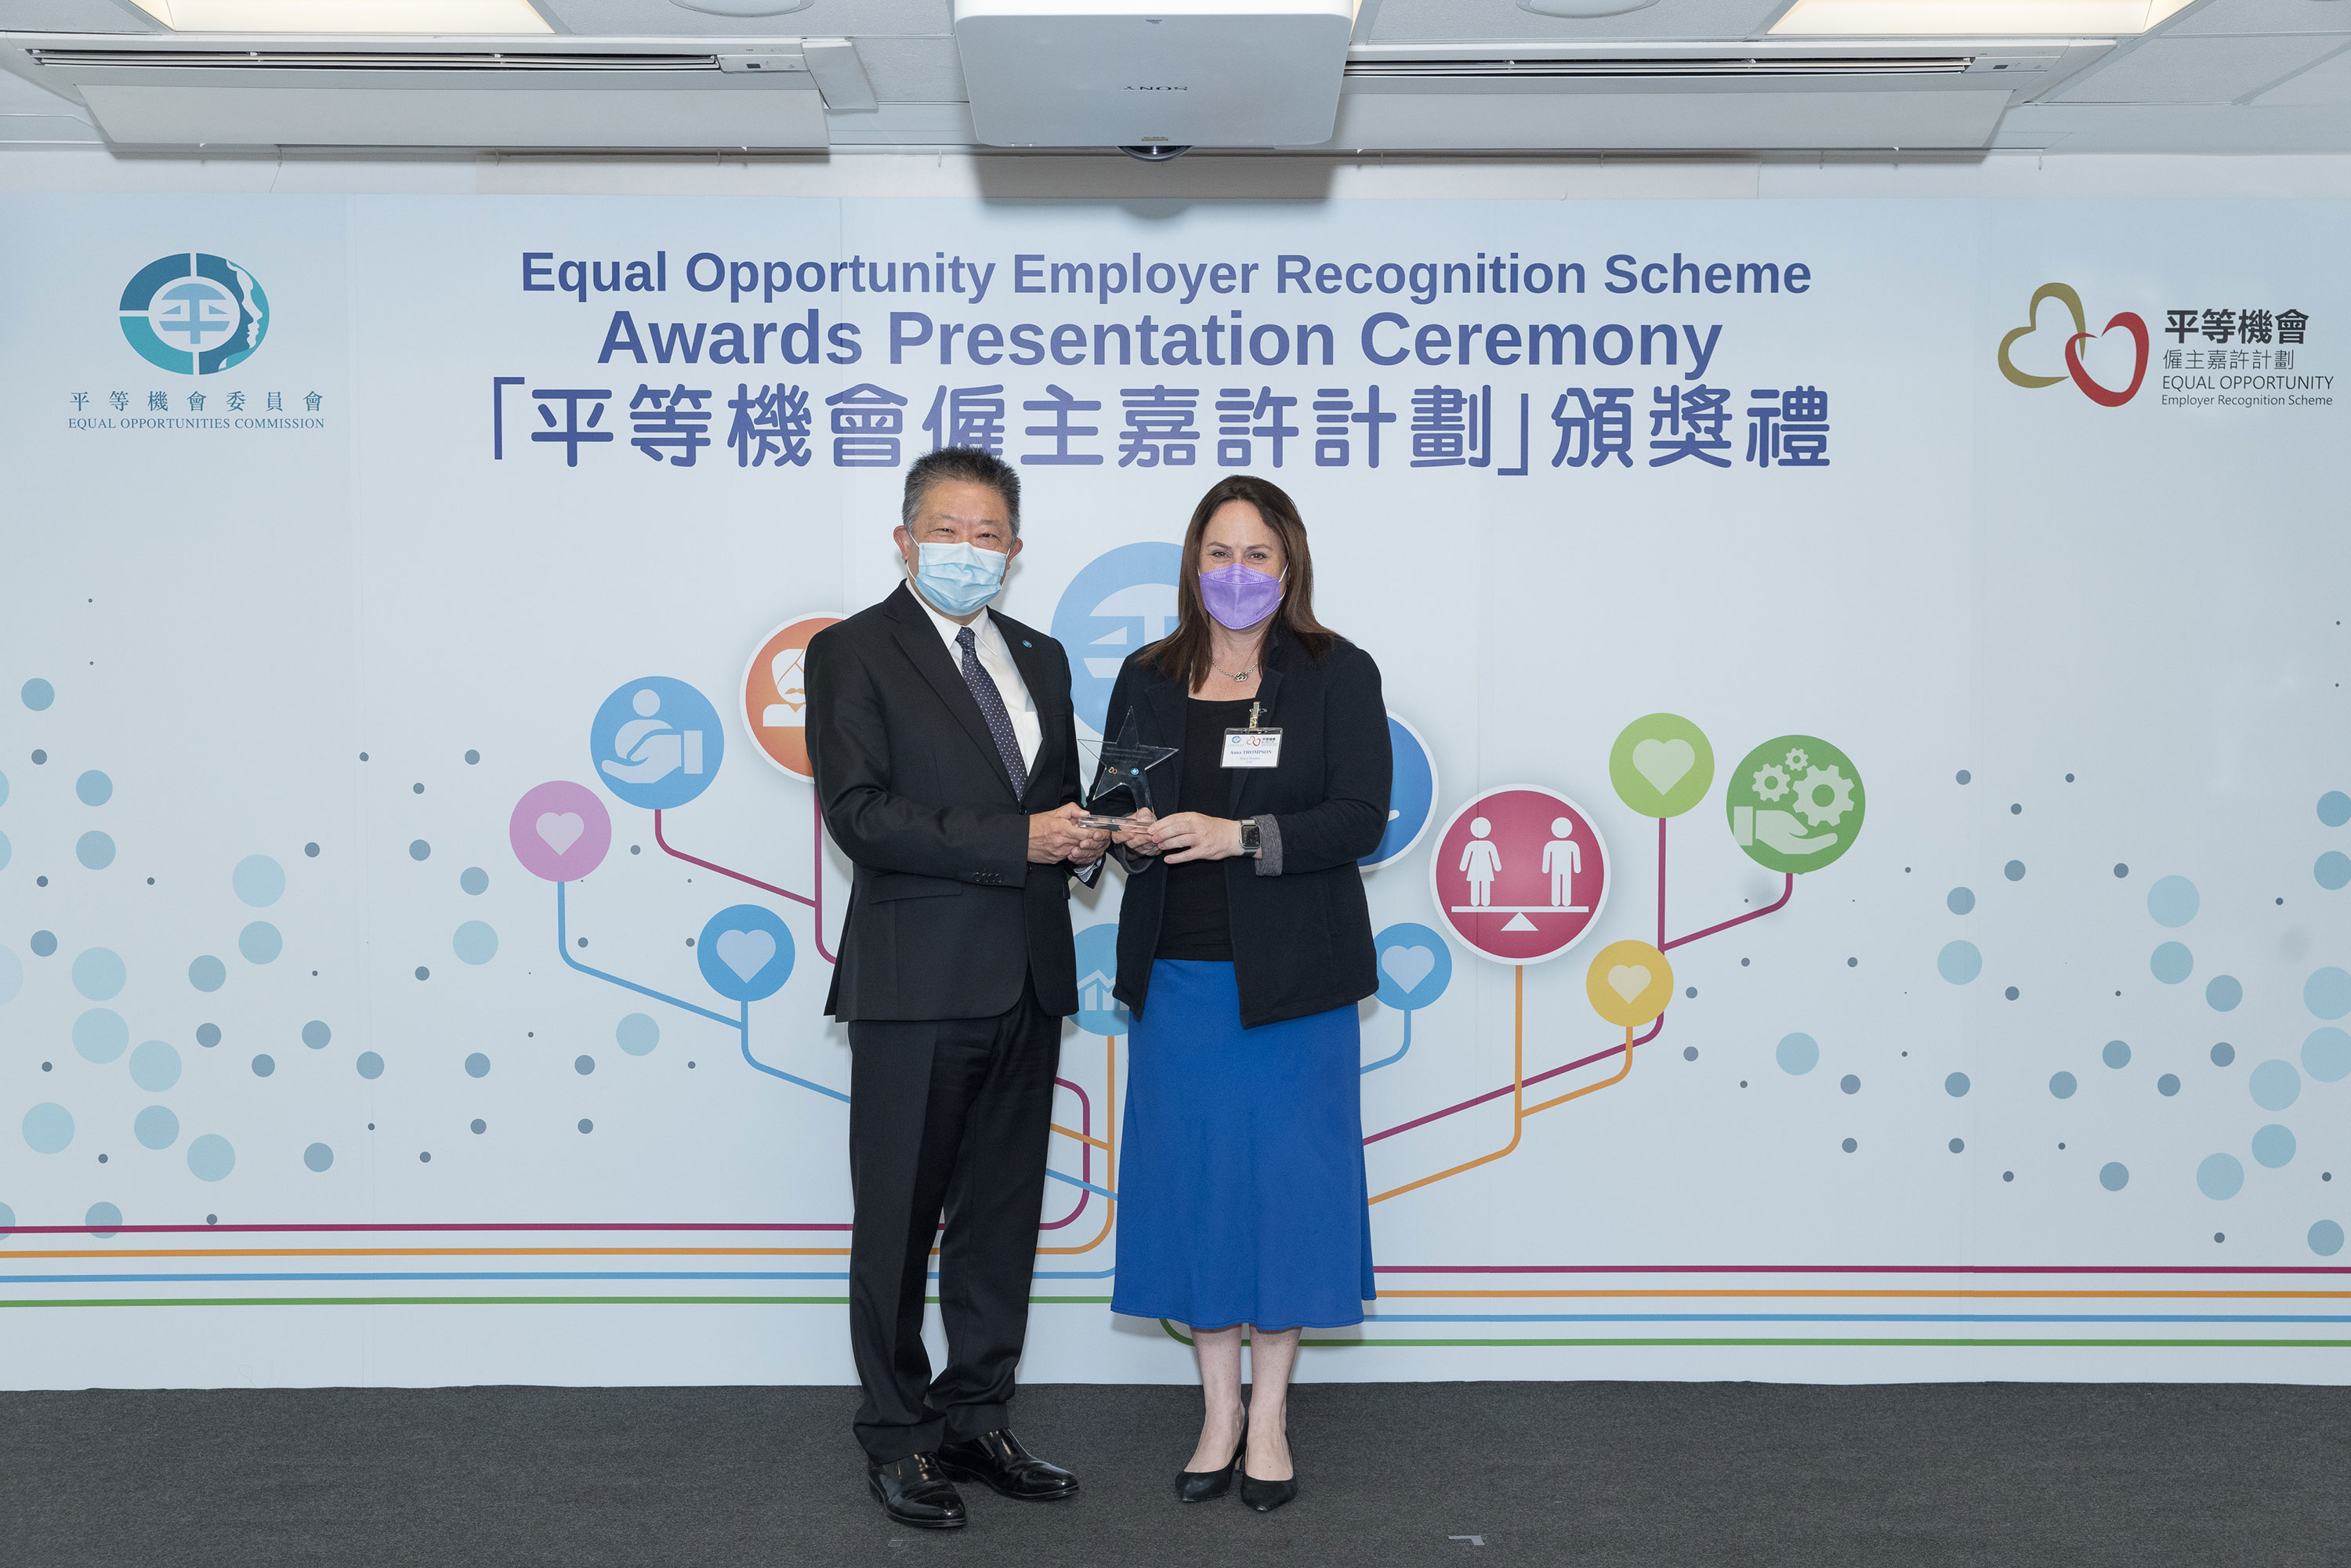 Mr Ricky CHU Man-kin, IDS, Chairperson of the Equal Opportunities Commission (left) presents souvenir to EOC Member Ms Anna THOMPSON (right), who served as member of the assessment panel of the Equal Opportunity Employer Recognition Scheme. 